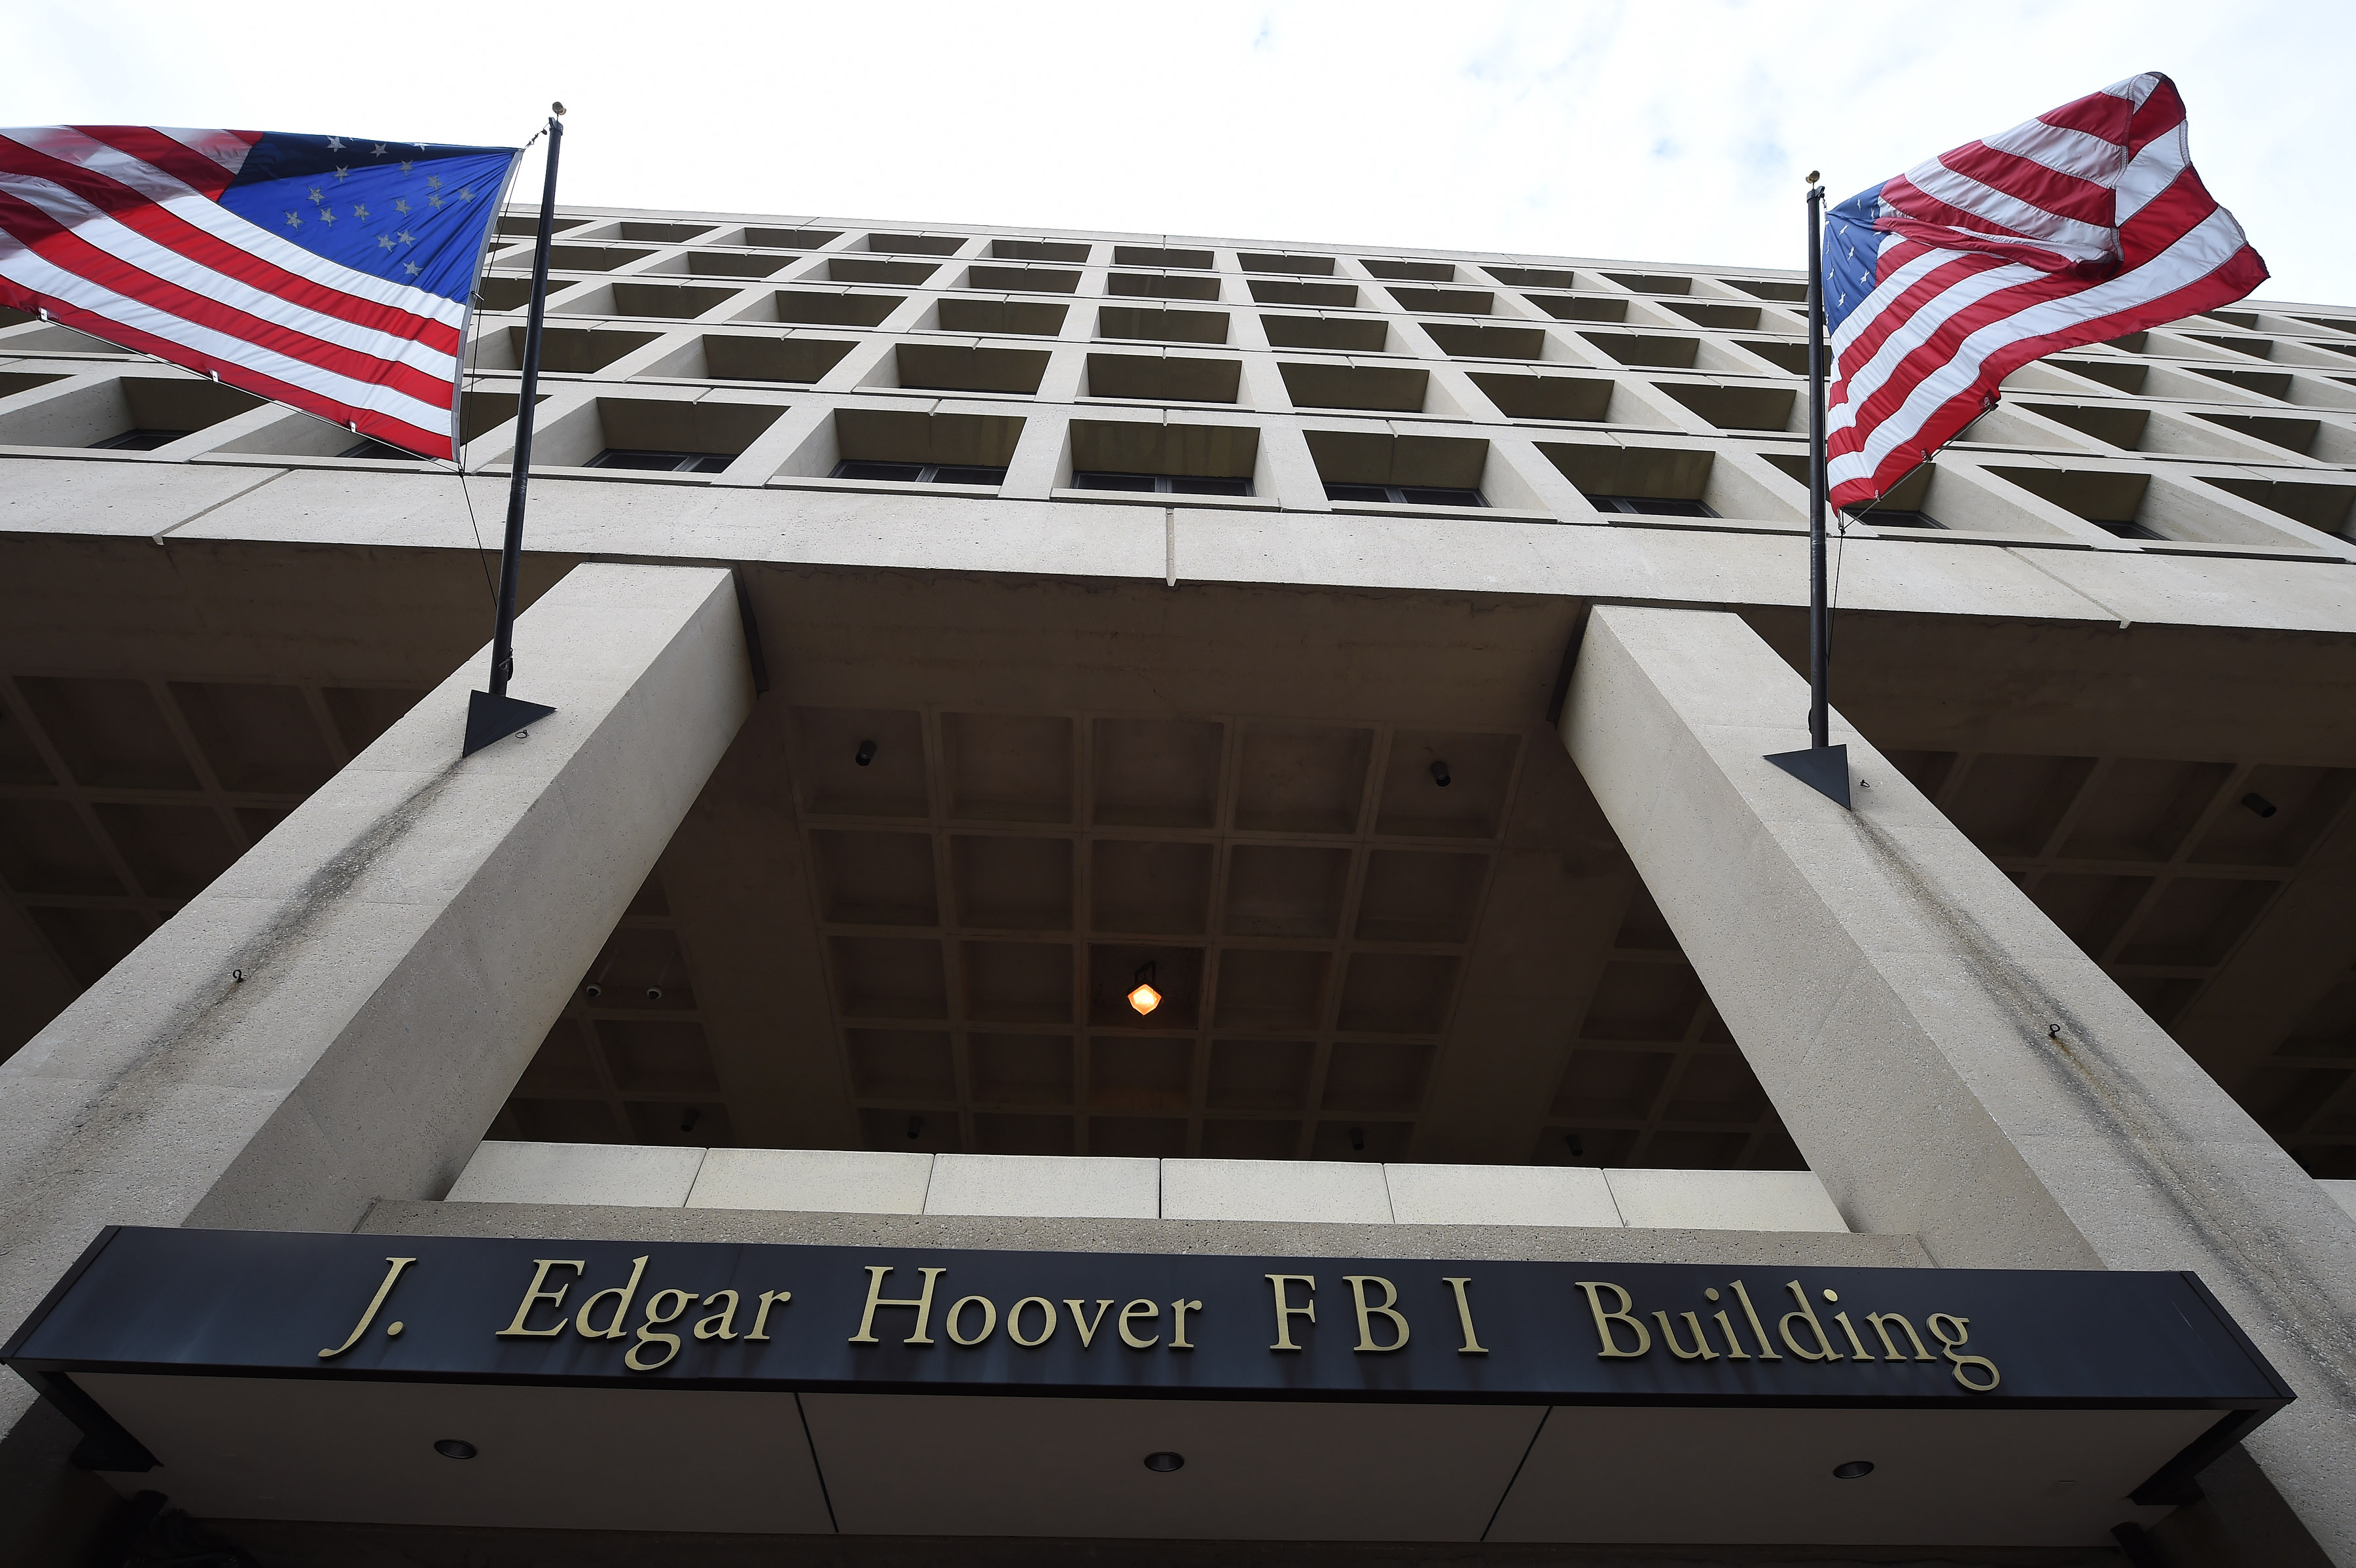 The exterior of the J. Edgar Hoover Building, which is the headquarters of the FBI, on Aug. 20, 2015 in Washington, D.C. (Matt McClain—The Washington Post/Getty Images)